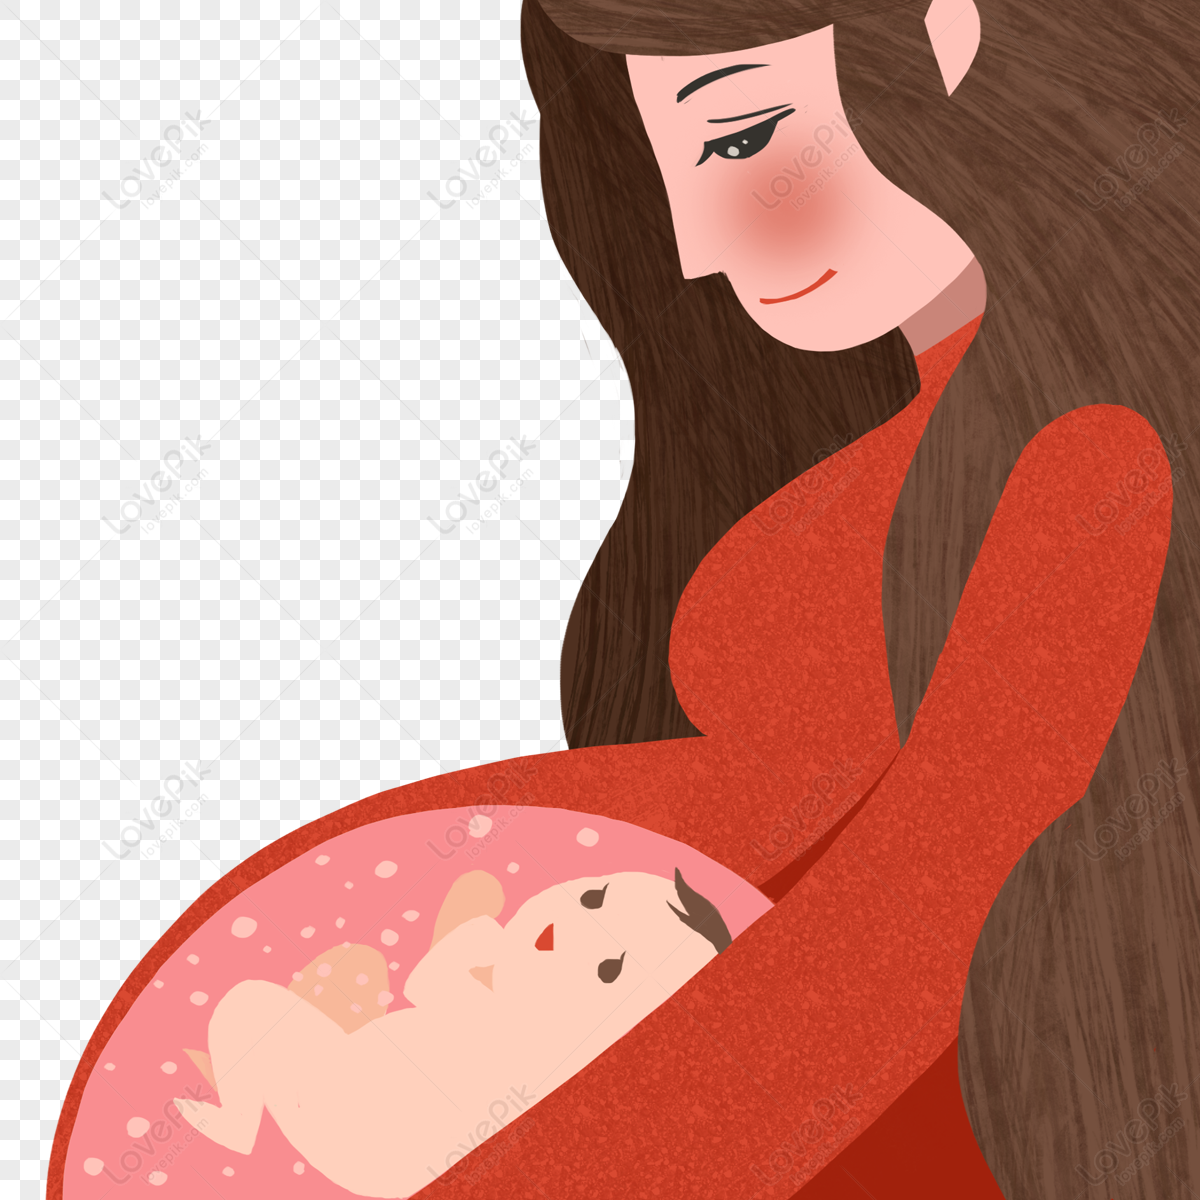 Pregnant Woman PNG Transparent Background And Clipart Image For Free  Download - Lovepik | 400175590